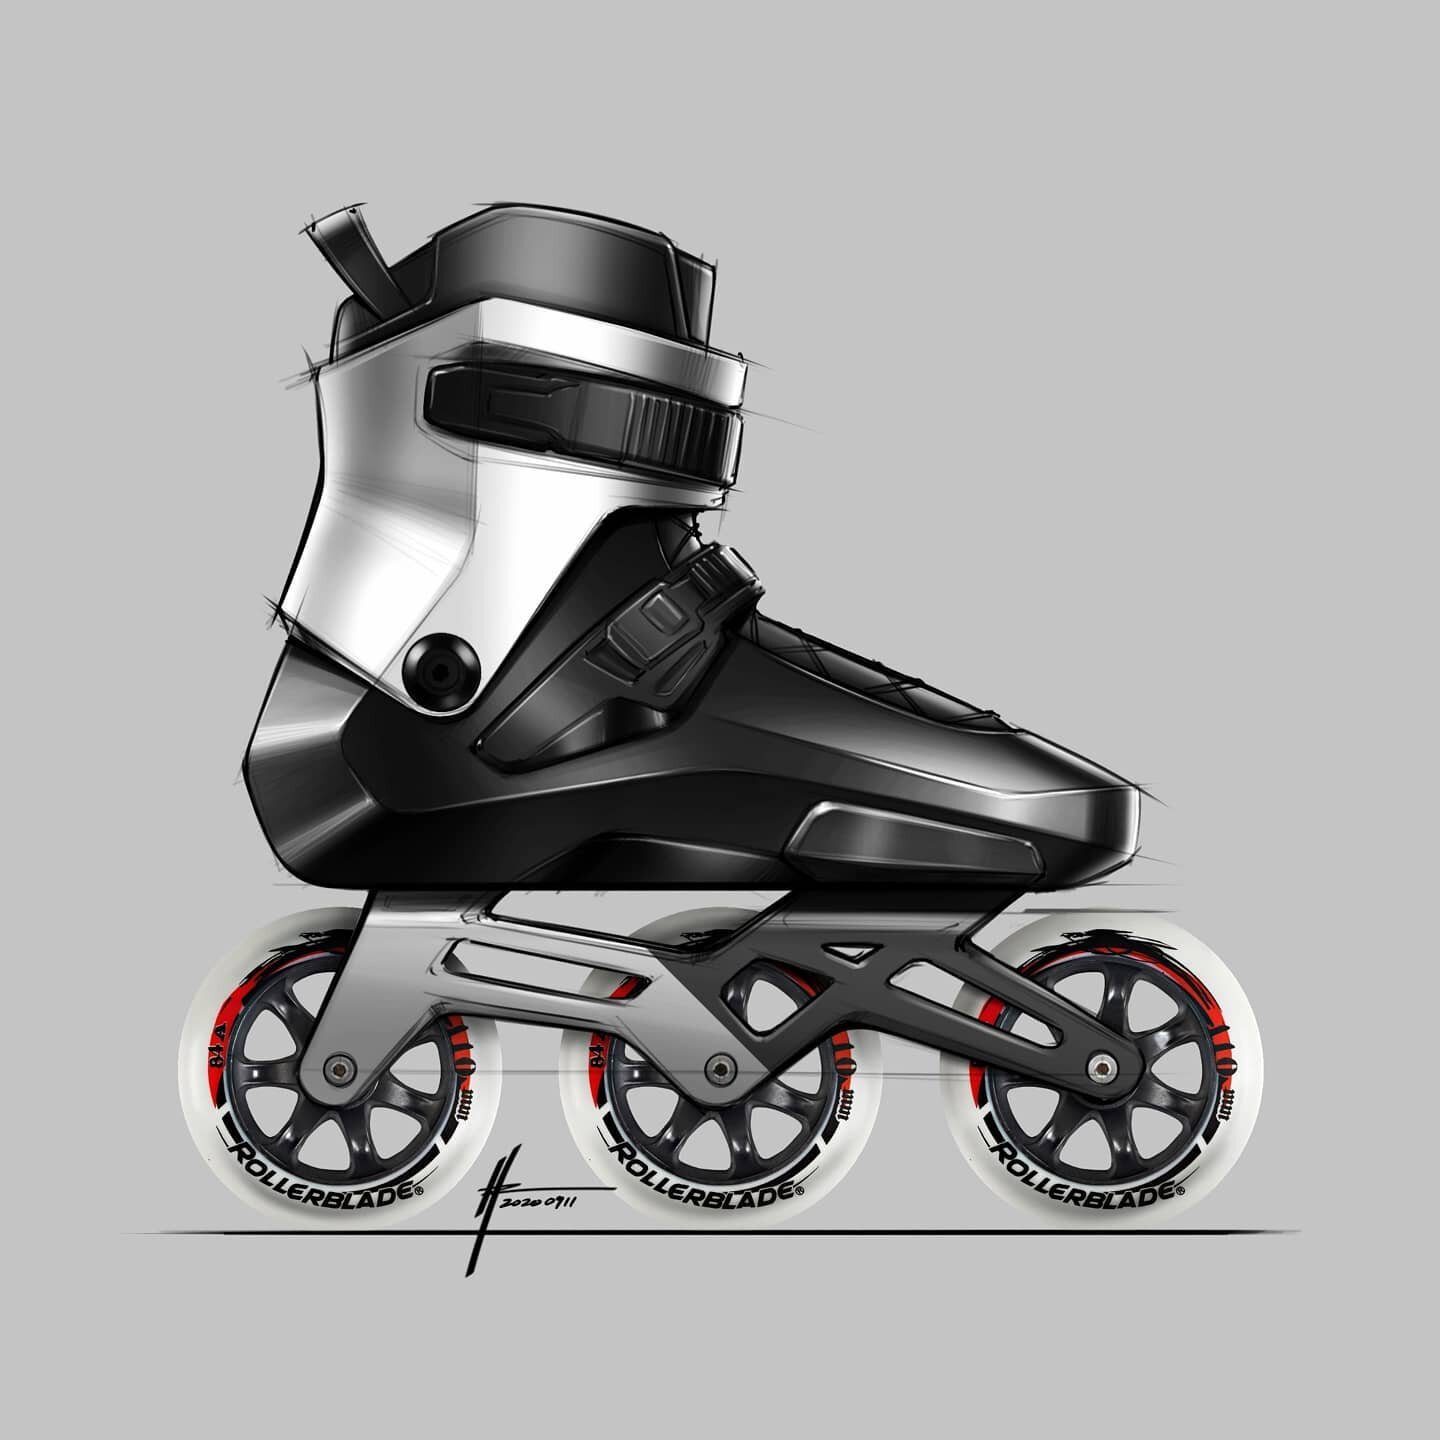 Thanks to the air quality here, I'm stuck inside sketching inline skates instead of going out and using them #2020